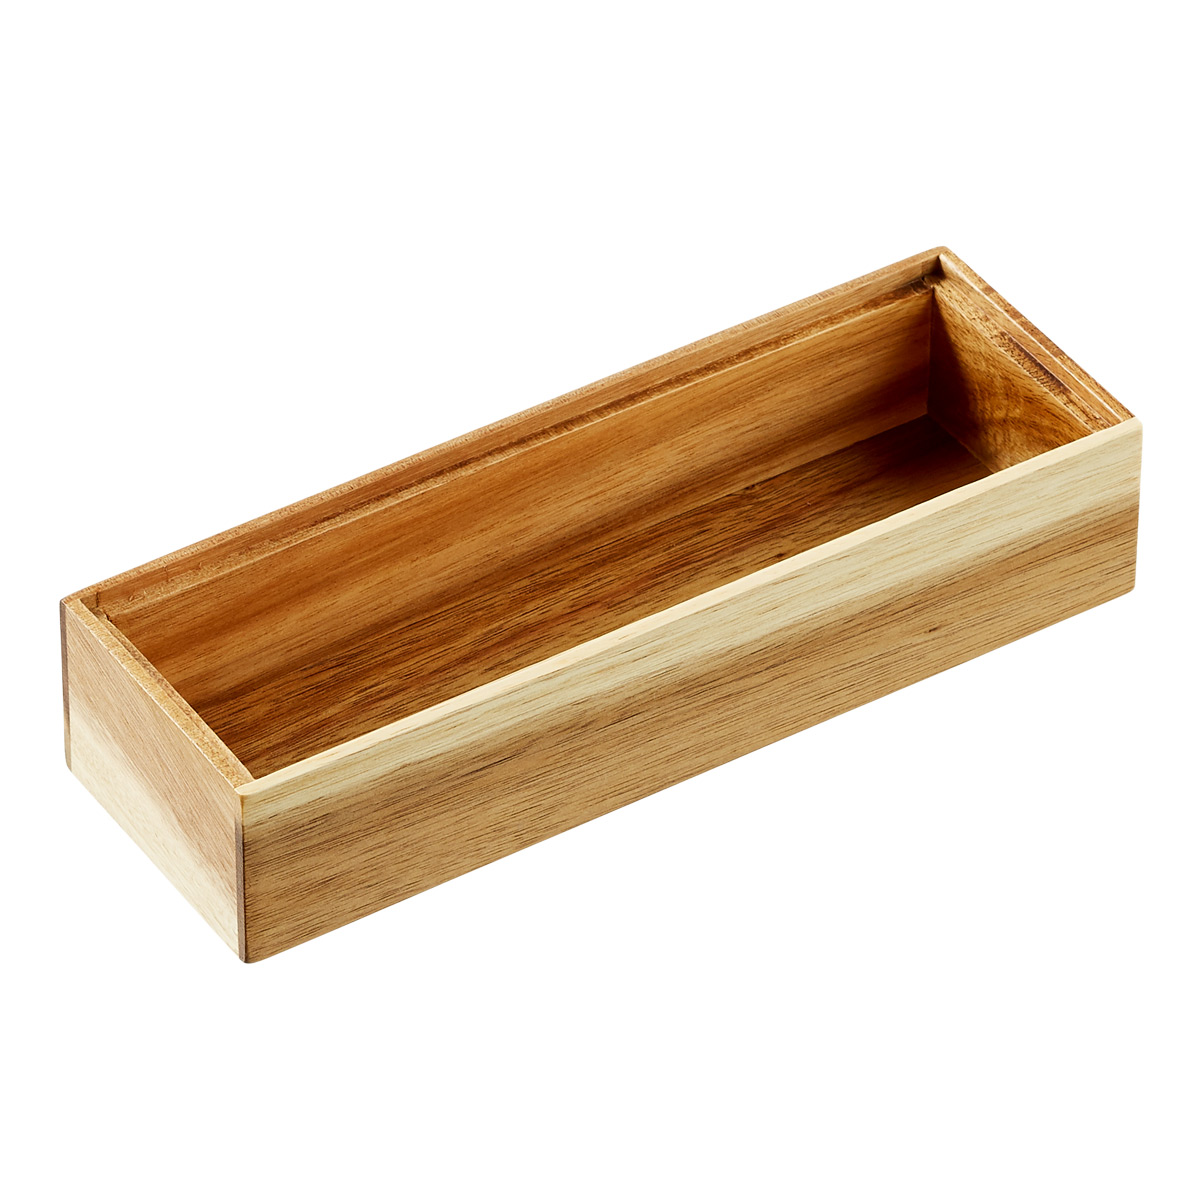 https://www.containerstore.com/catalogimages/382118/10079621-acacia-stacking-drawer-orga.jpg